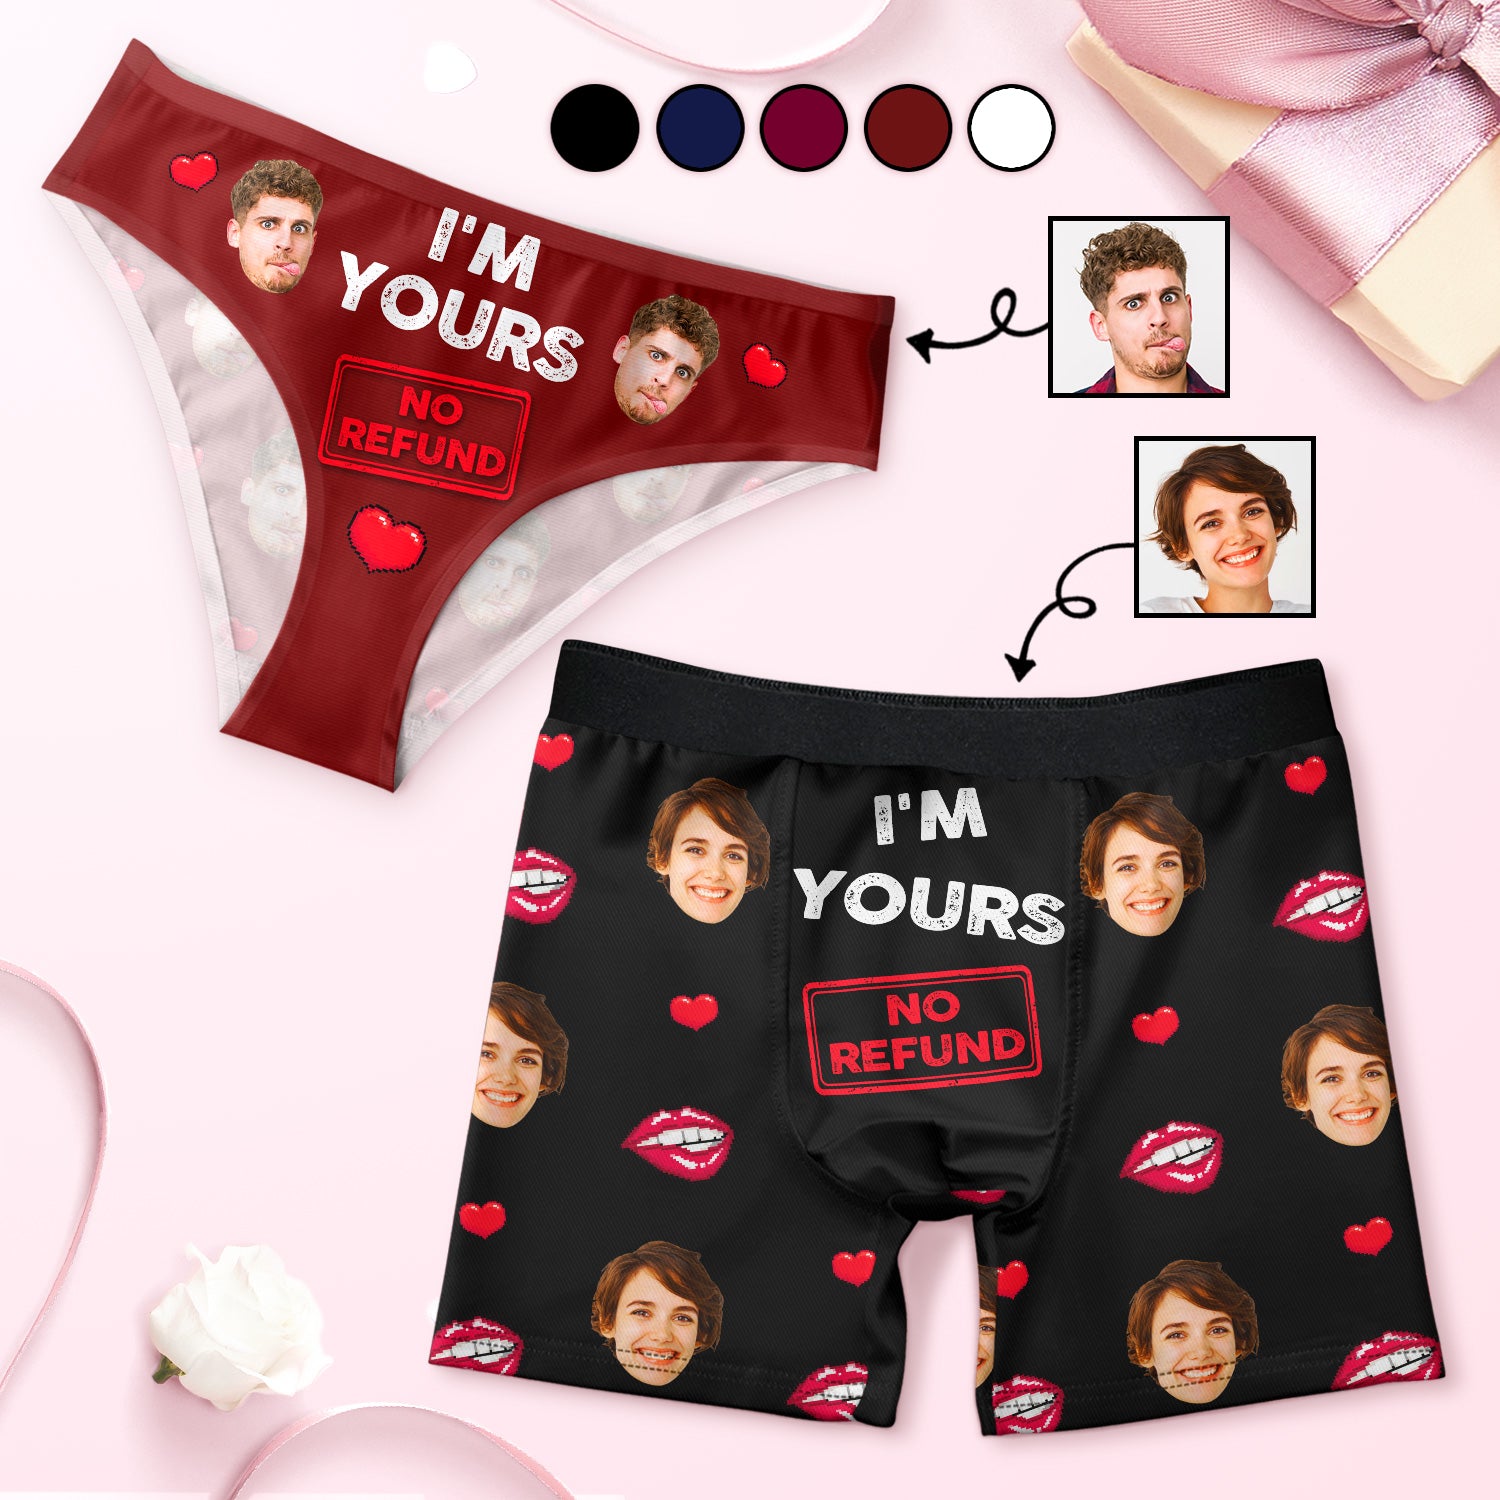 Matching Underwear for Couples Husband and Wife Gifts Funny Valentines Day,  His and Hers Undies Set : Handmade Products 